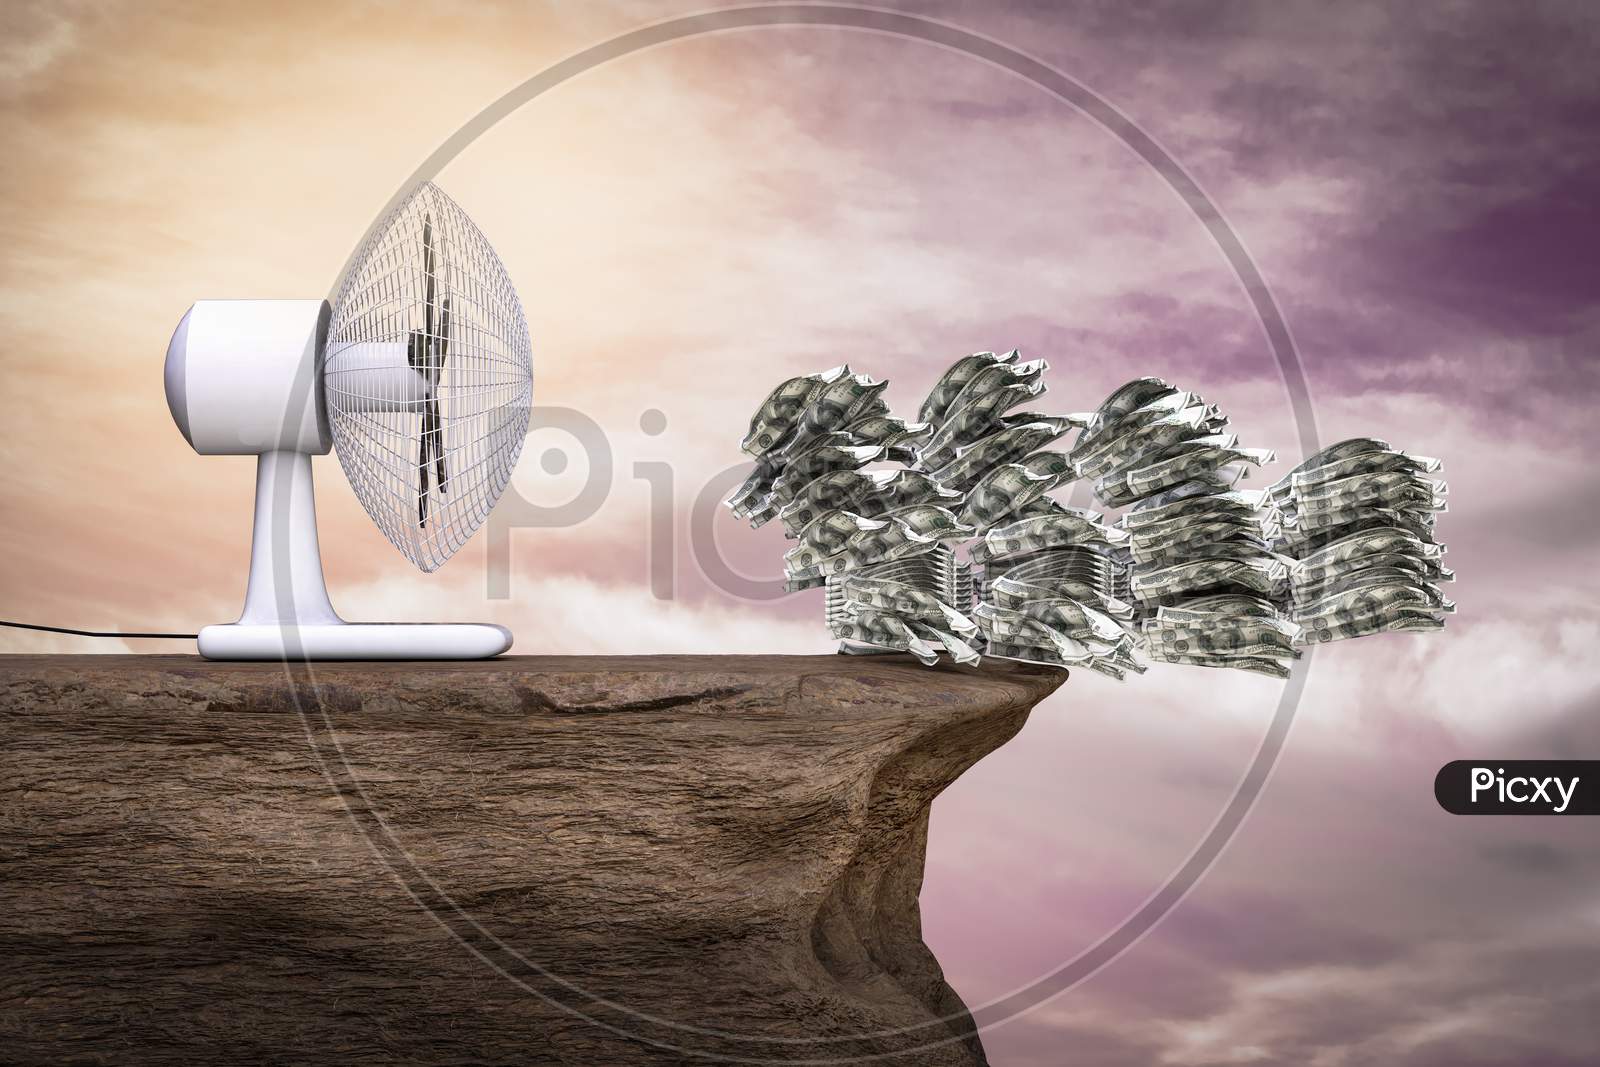 A Fan Blows Big Pile Of Money On Cliff At Sunset Magenta Day. Markets Fall Or Business Loss Or Investment Lost Or Financial Failure Or Crisis Market Concept. 3D Illustration